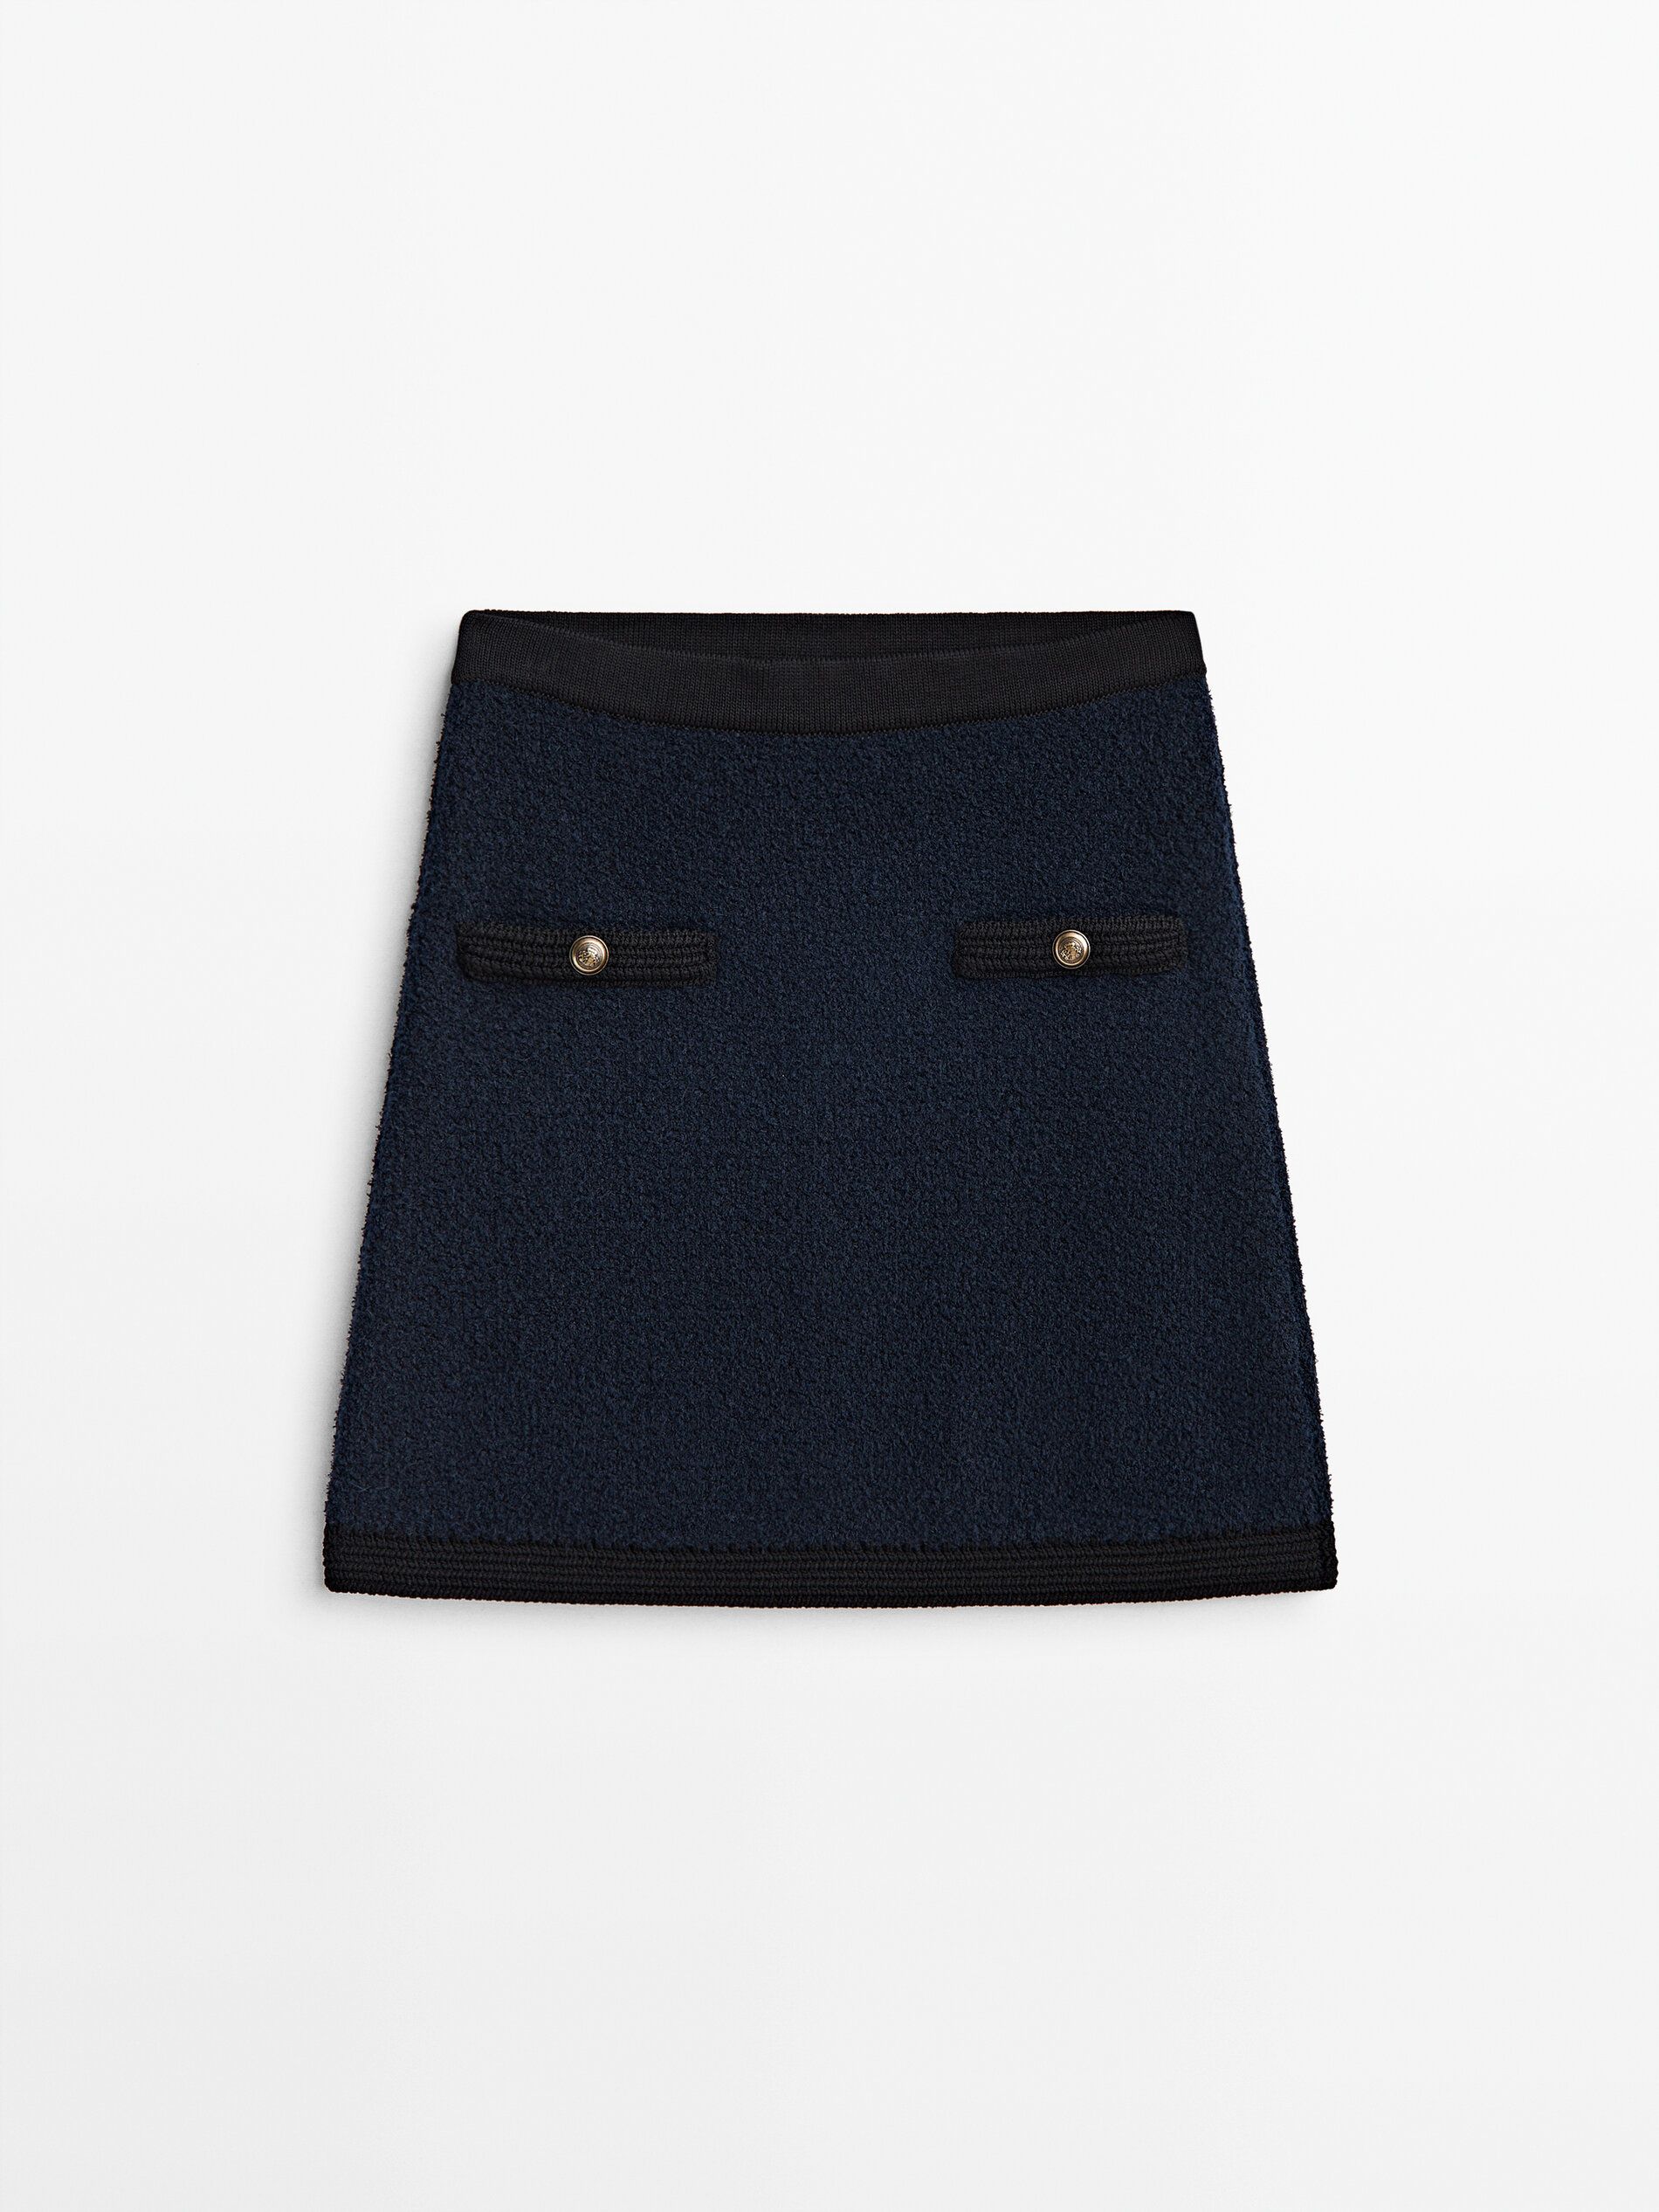 Textured knit mini skirt with gold-toned buttons | Massimo Dutti (US)